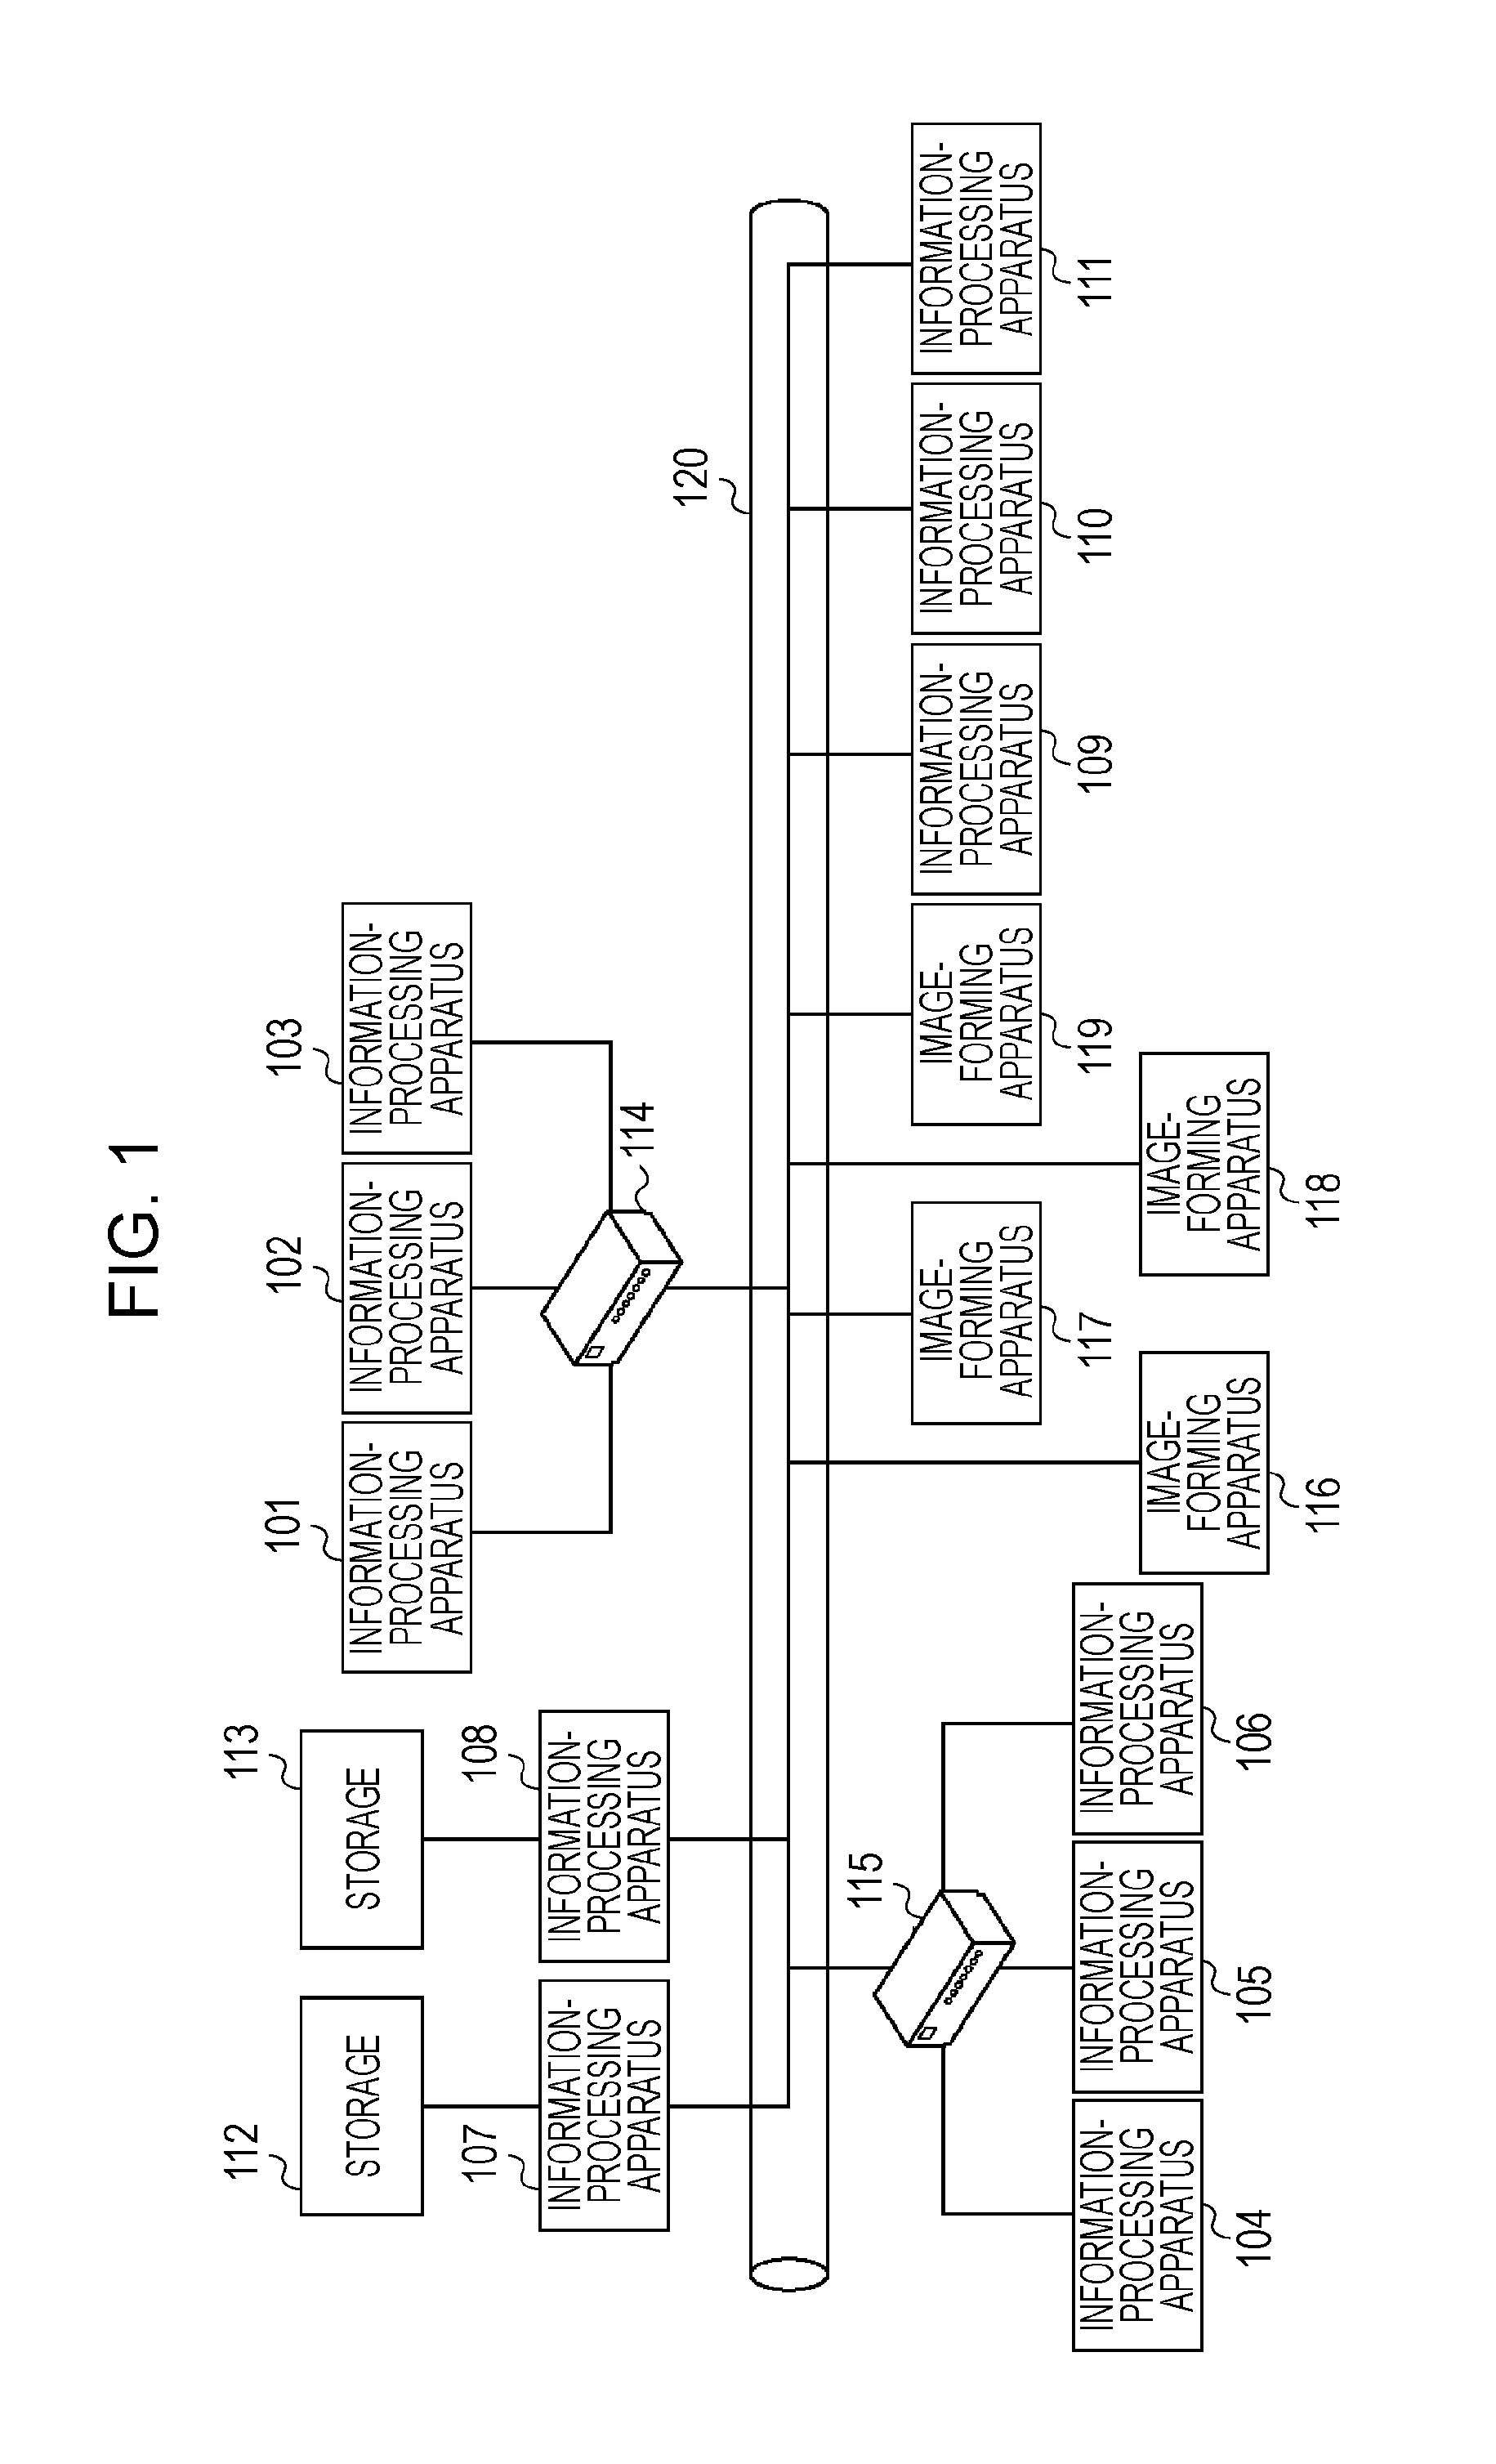 Job-submission-request apparatus and method for making a request from a plurality of apparatuses